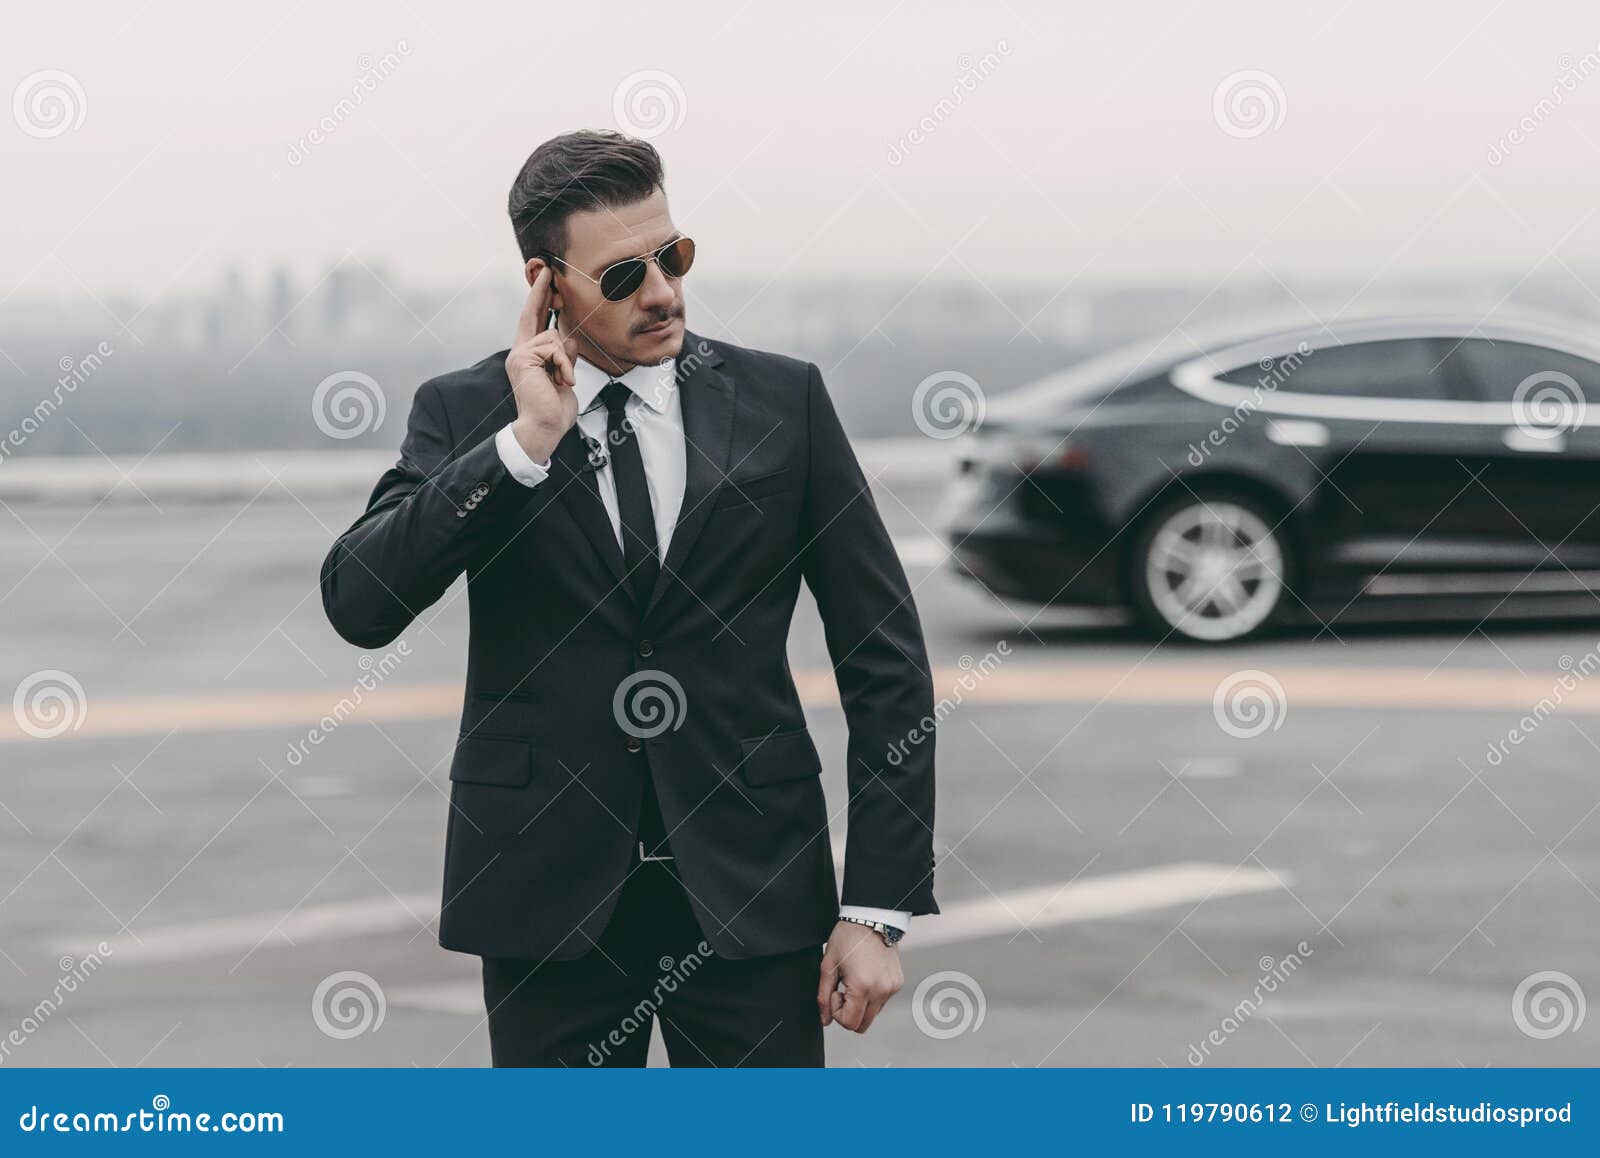 serious bodyguard listening message with security earpiece